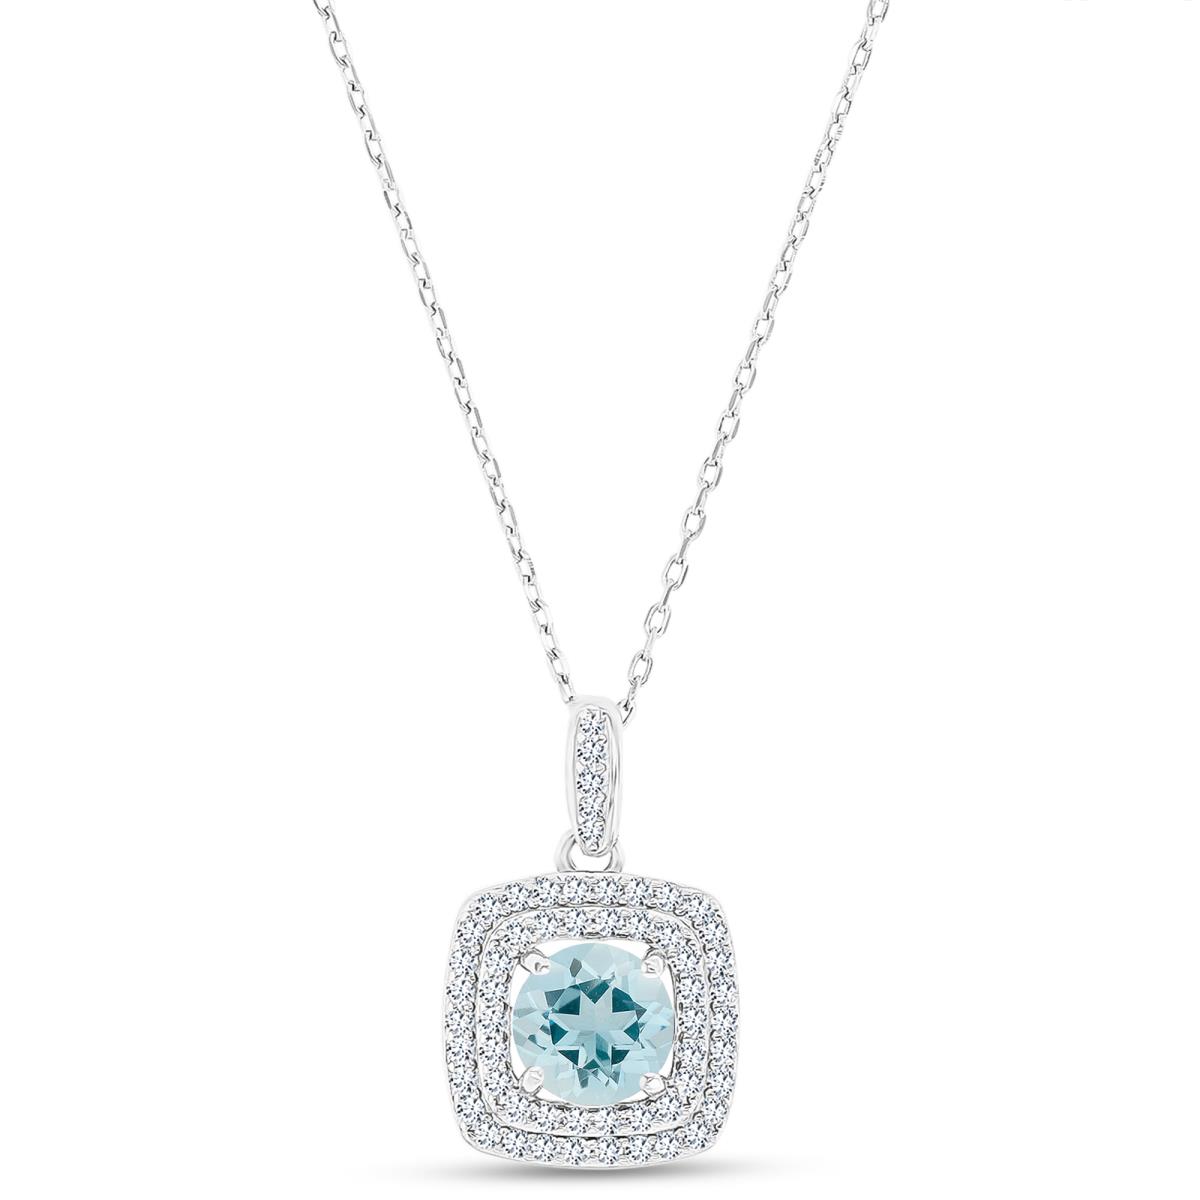 Sterling Silver Rhodium 7mm RD Aquamarine/ Cr White Sapphire Cushion Double Halo 16"+2" Necklace